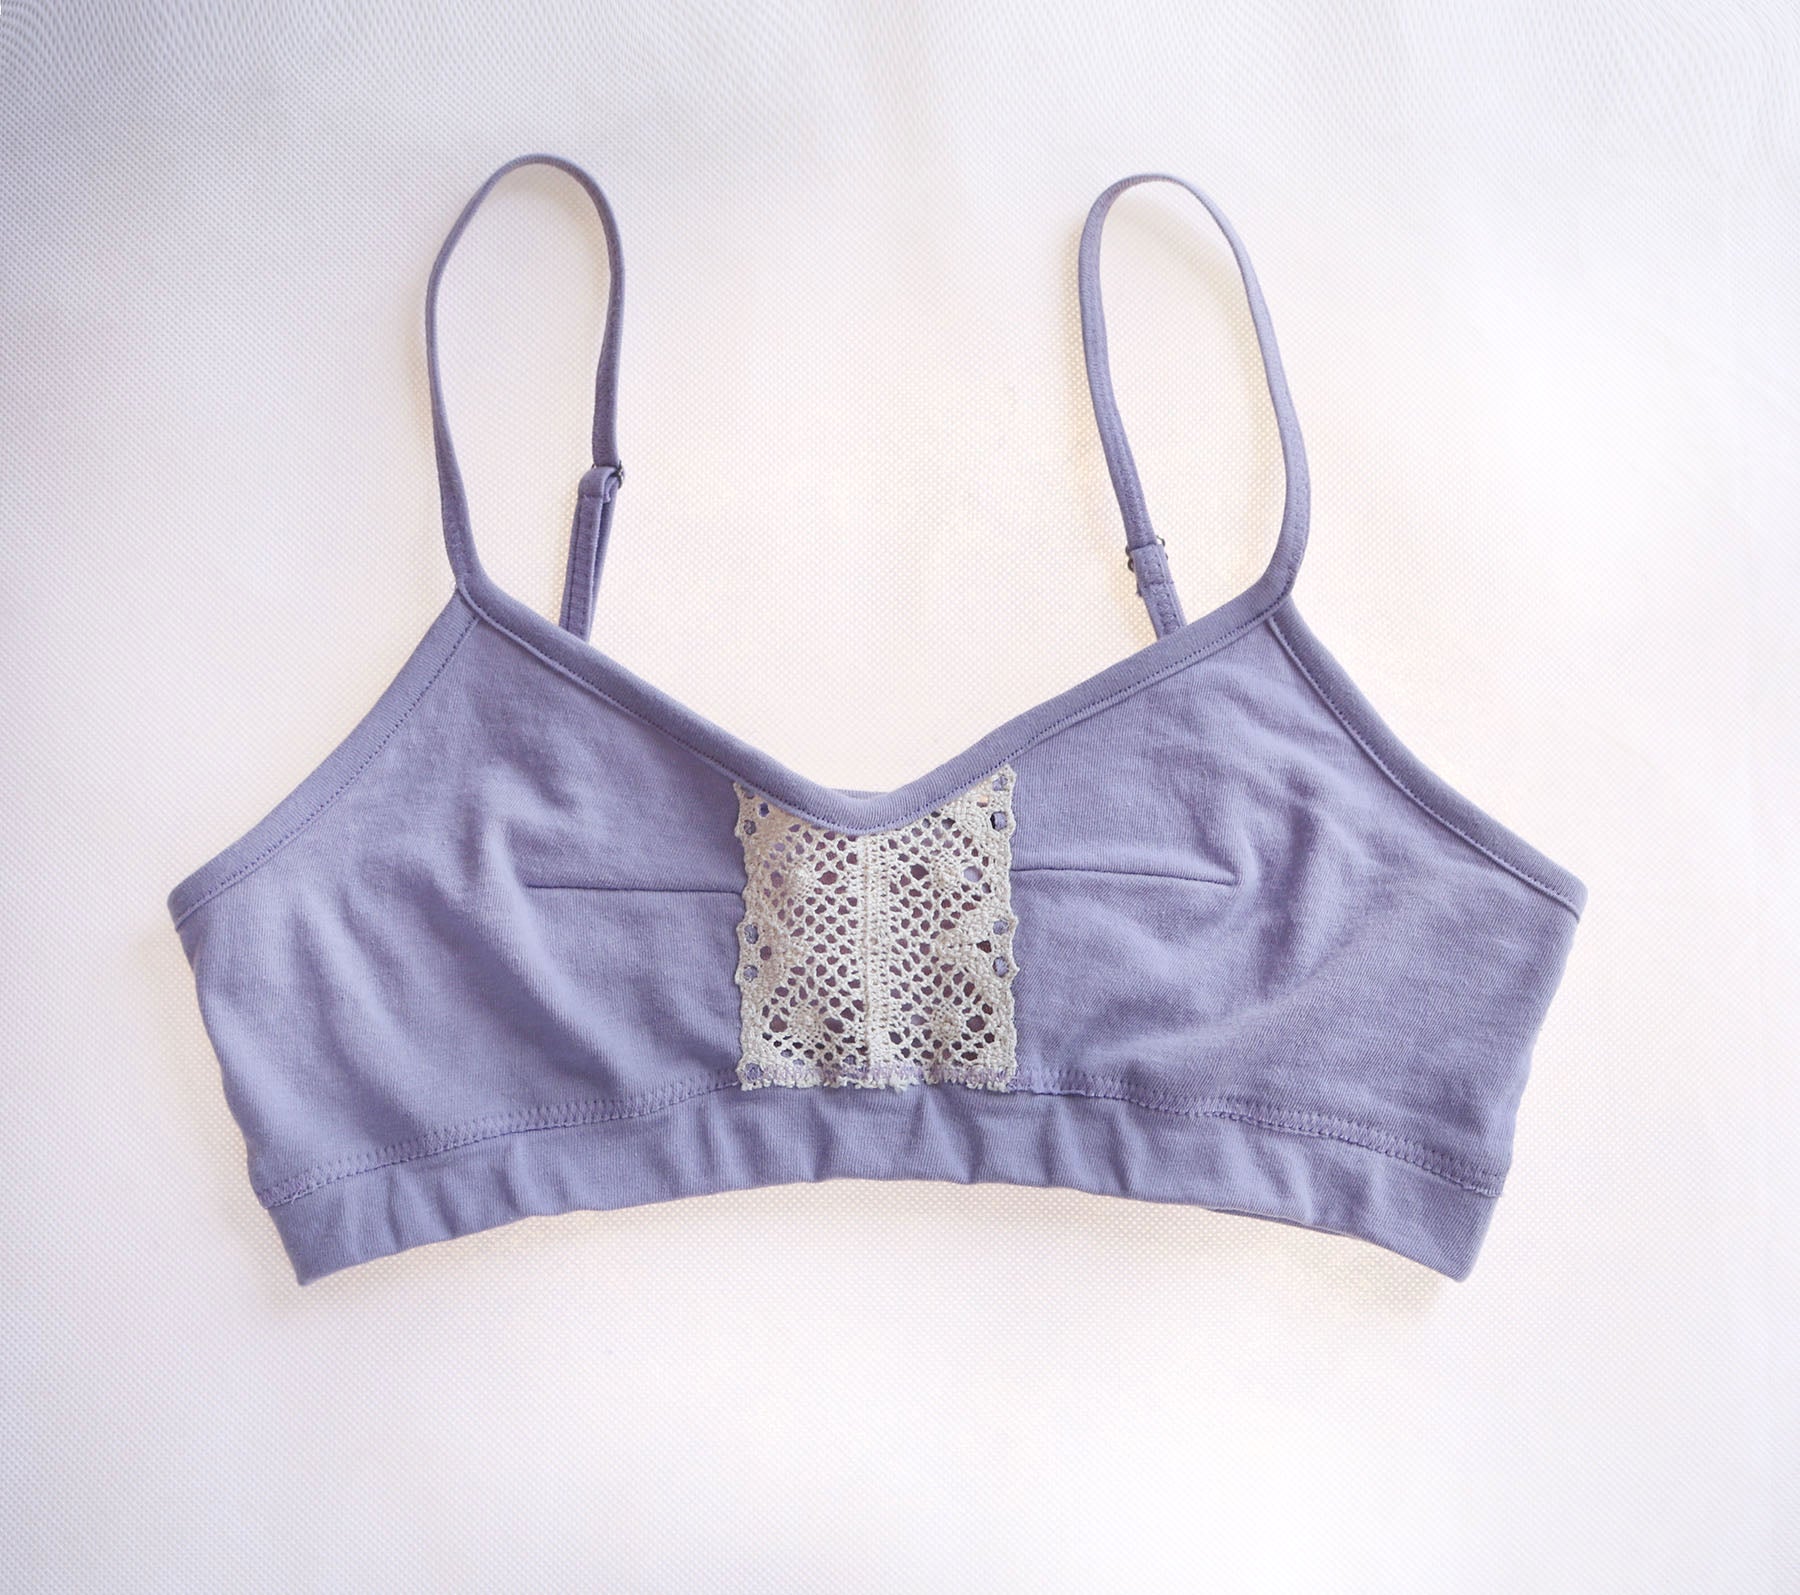 Women's Lace Smooth Cup Bralette made with Organic Cotton